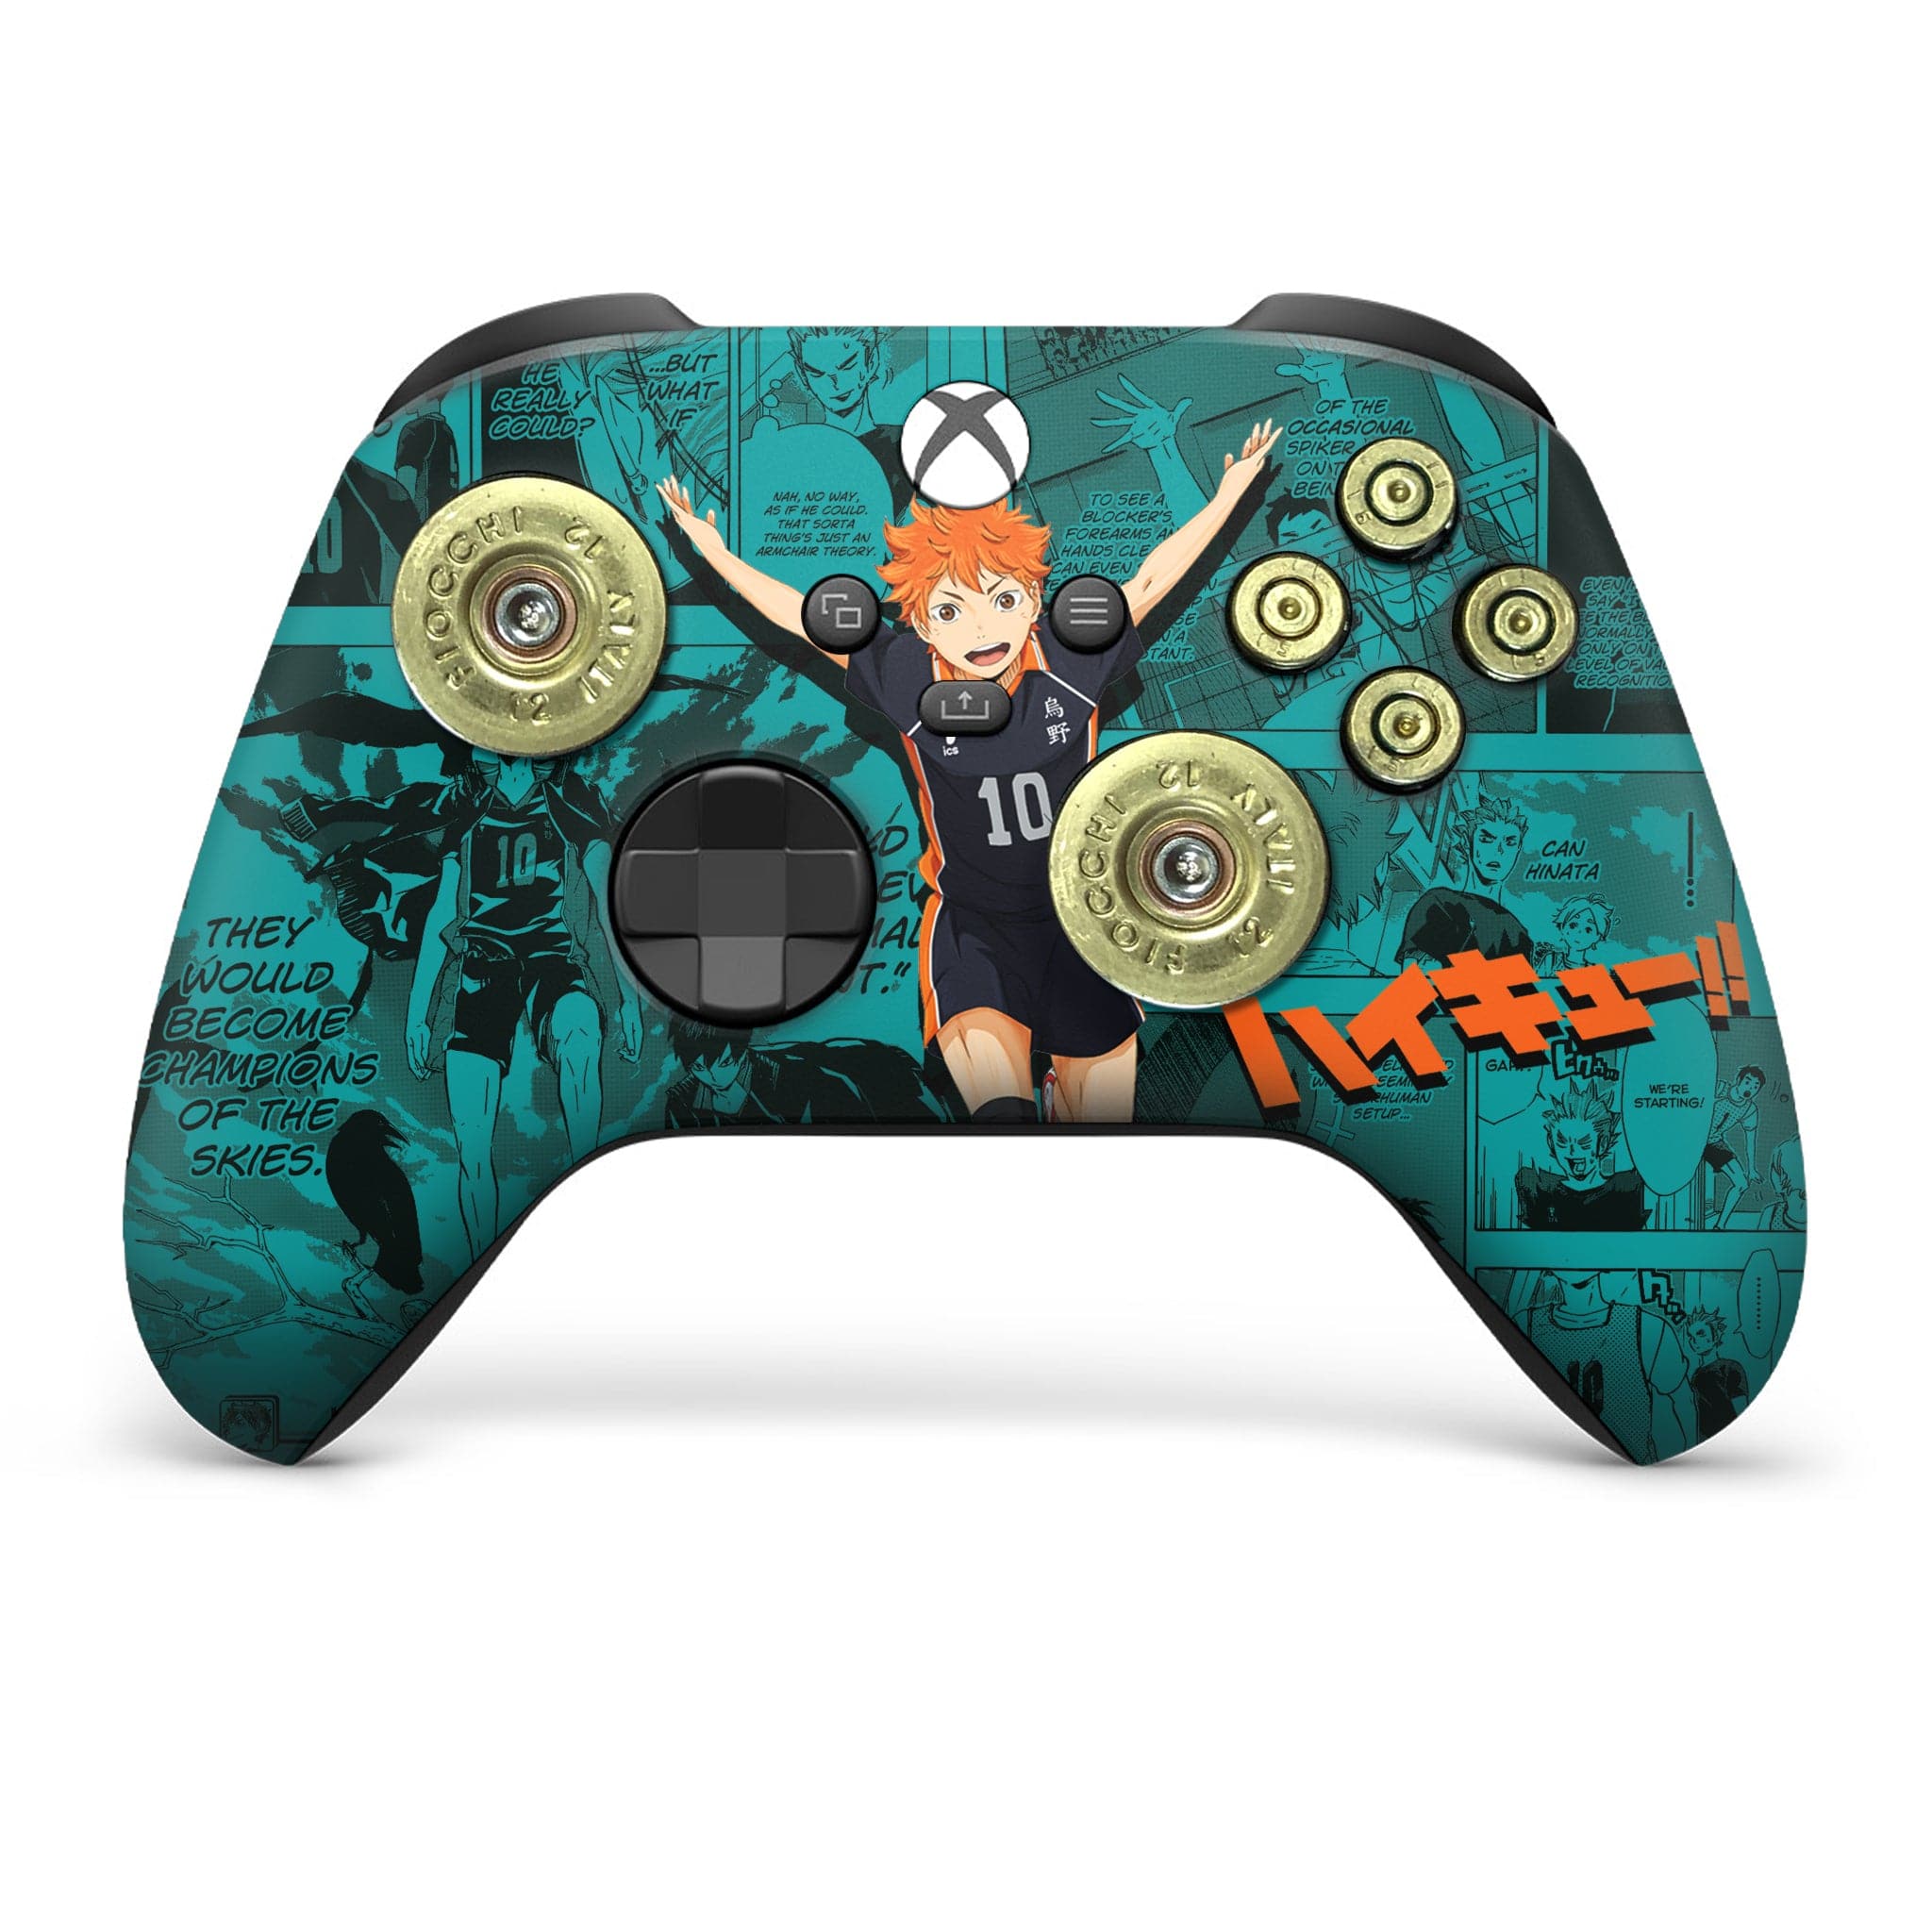 HIAKYU HINATA  inspired xbox x series controller with bullet buttons